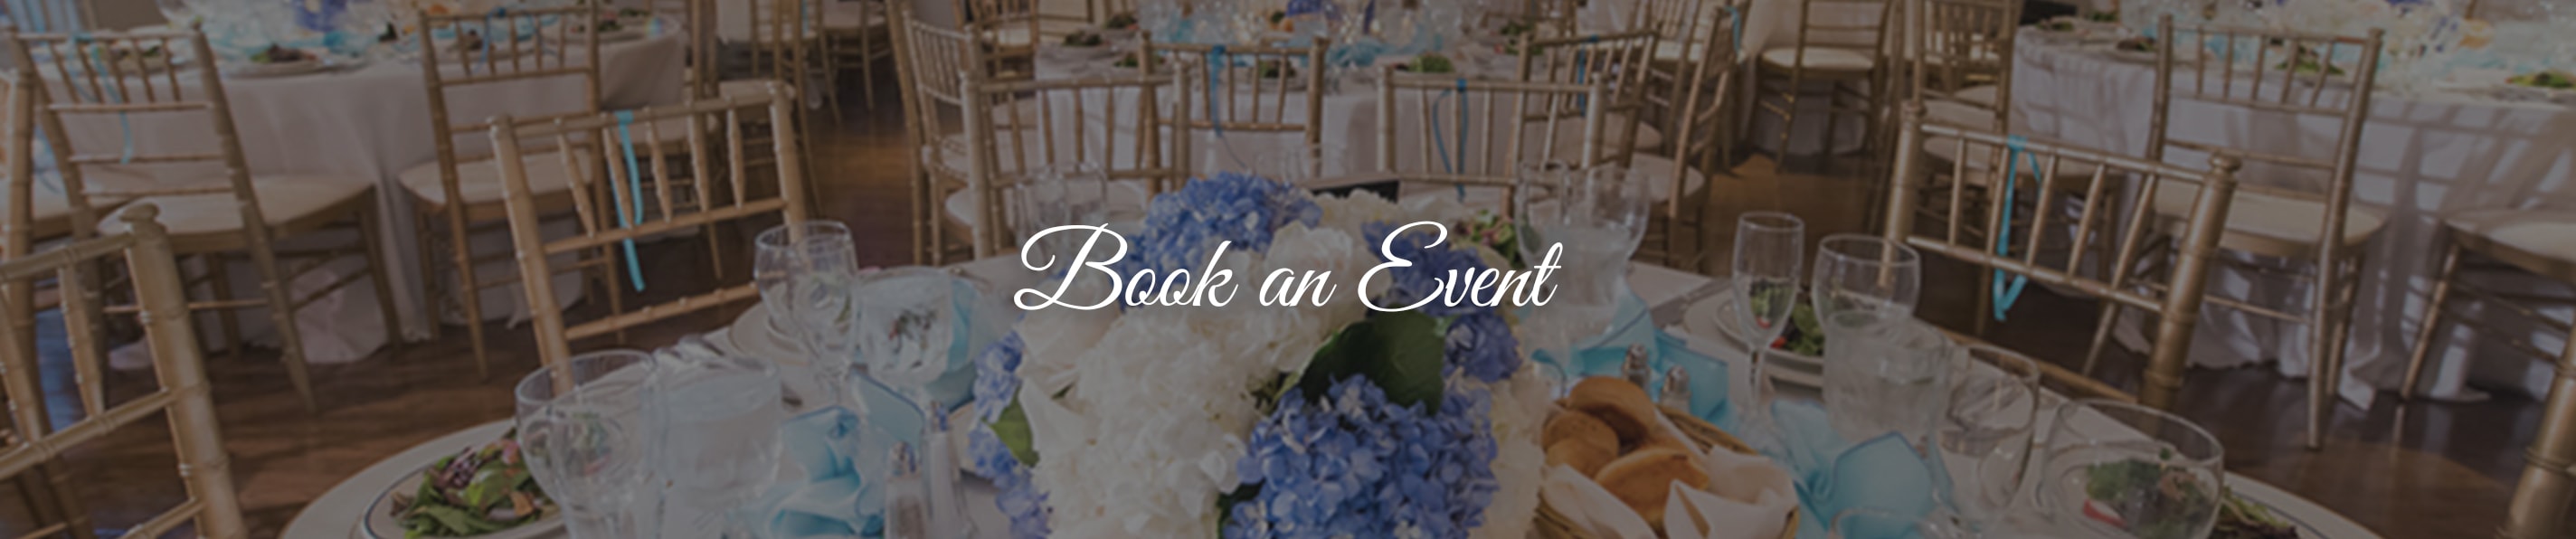 Book an Event at The Whittemore House in Washington DC